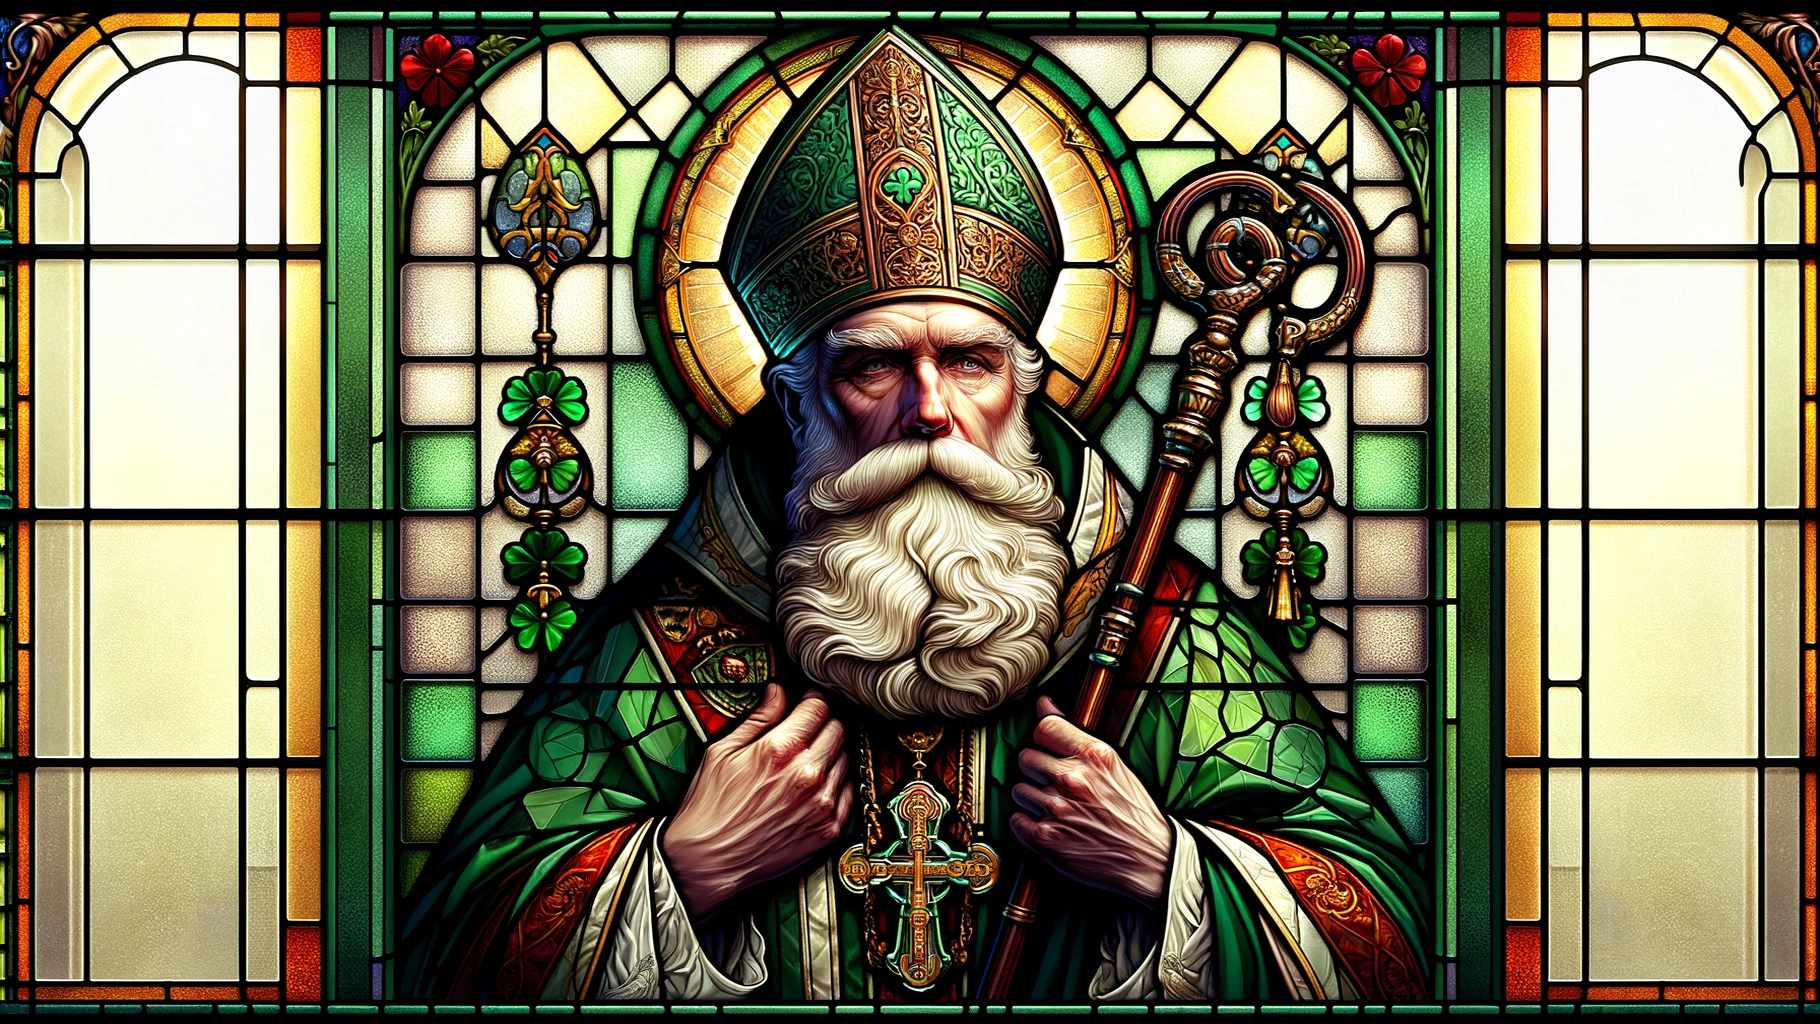 What Irish Saint’s Feast Day Takes Place During Lent?